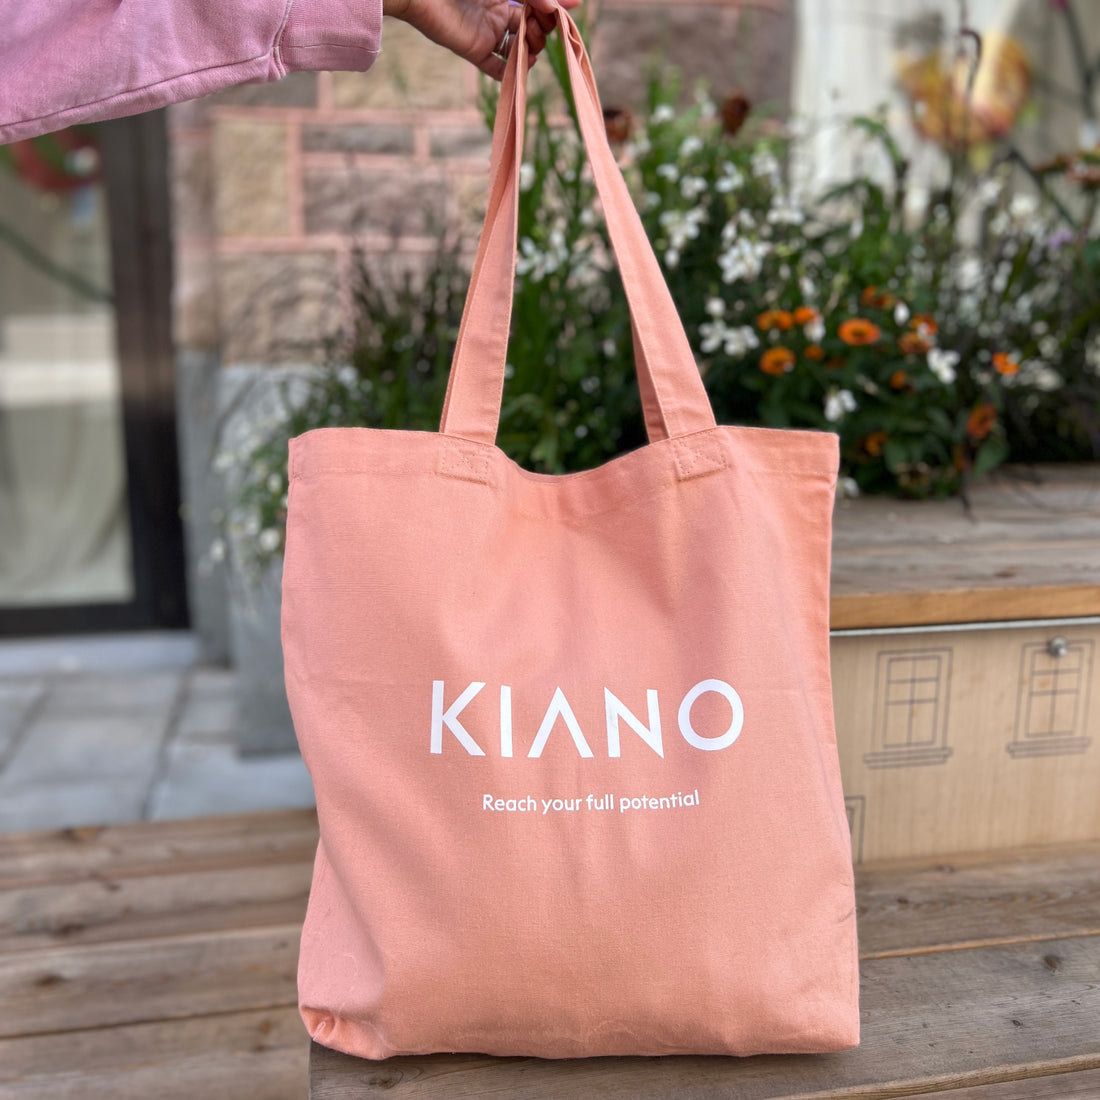 KIANO's Spacious Tote Bag: Perfect for Shopping, Work, or the Gym